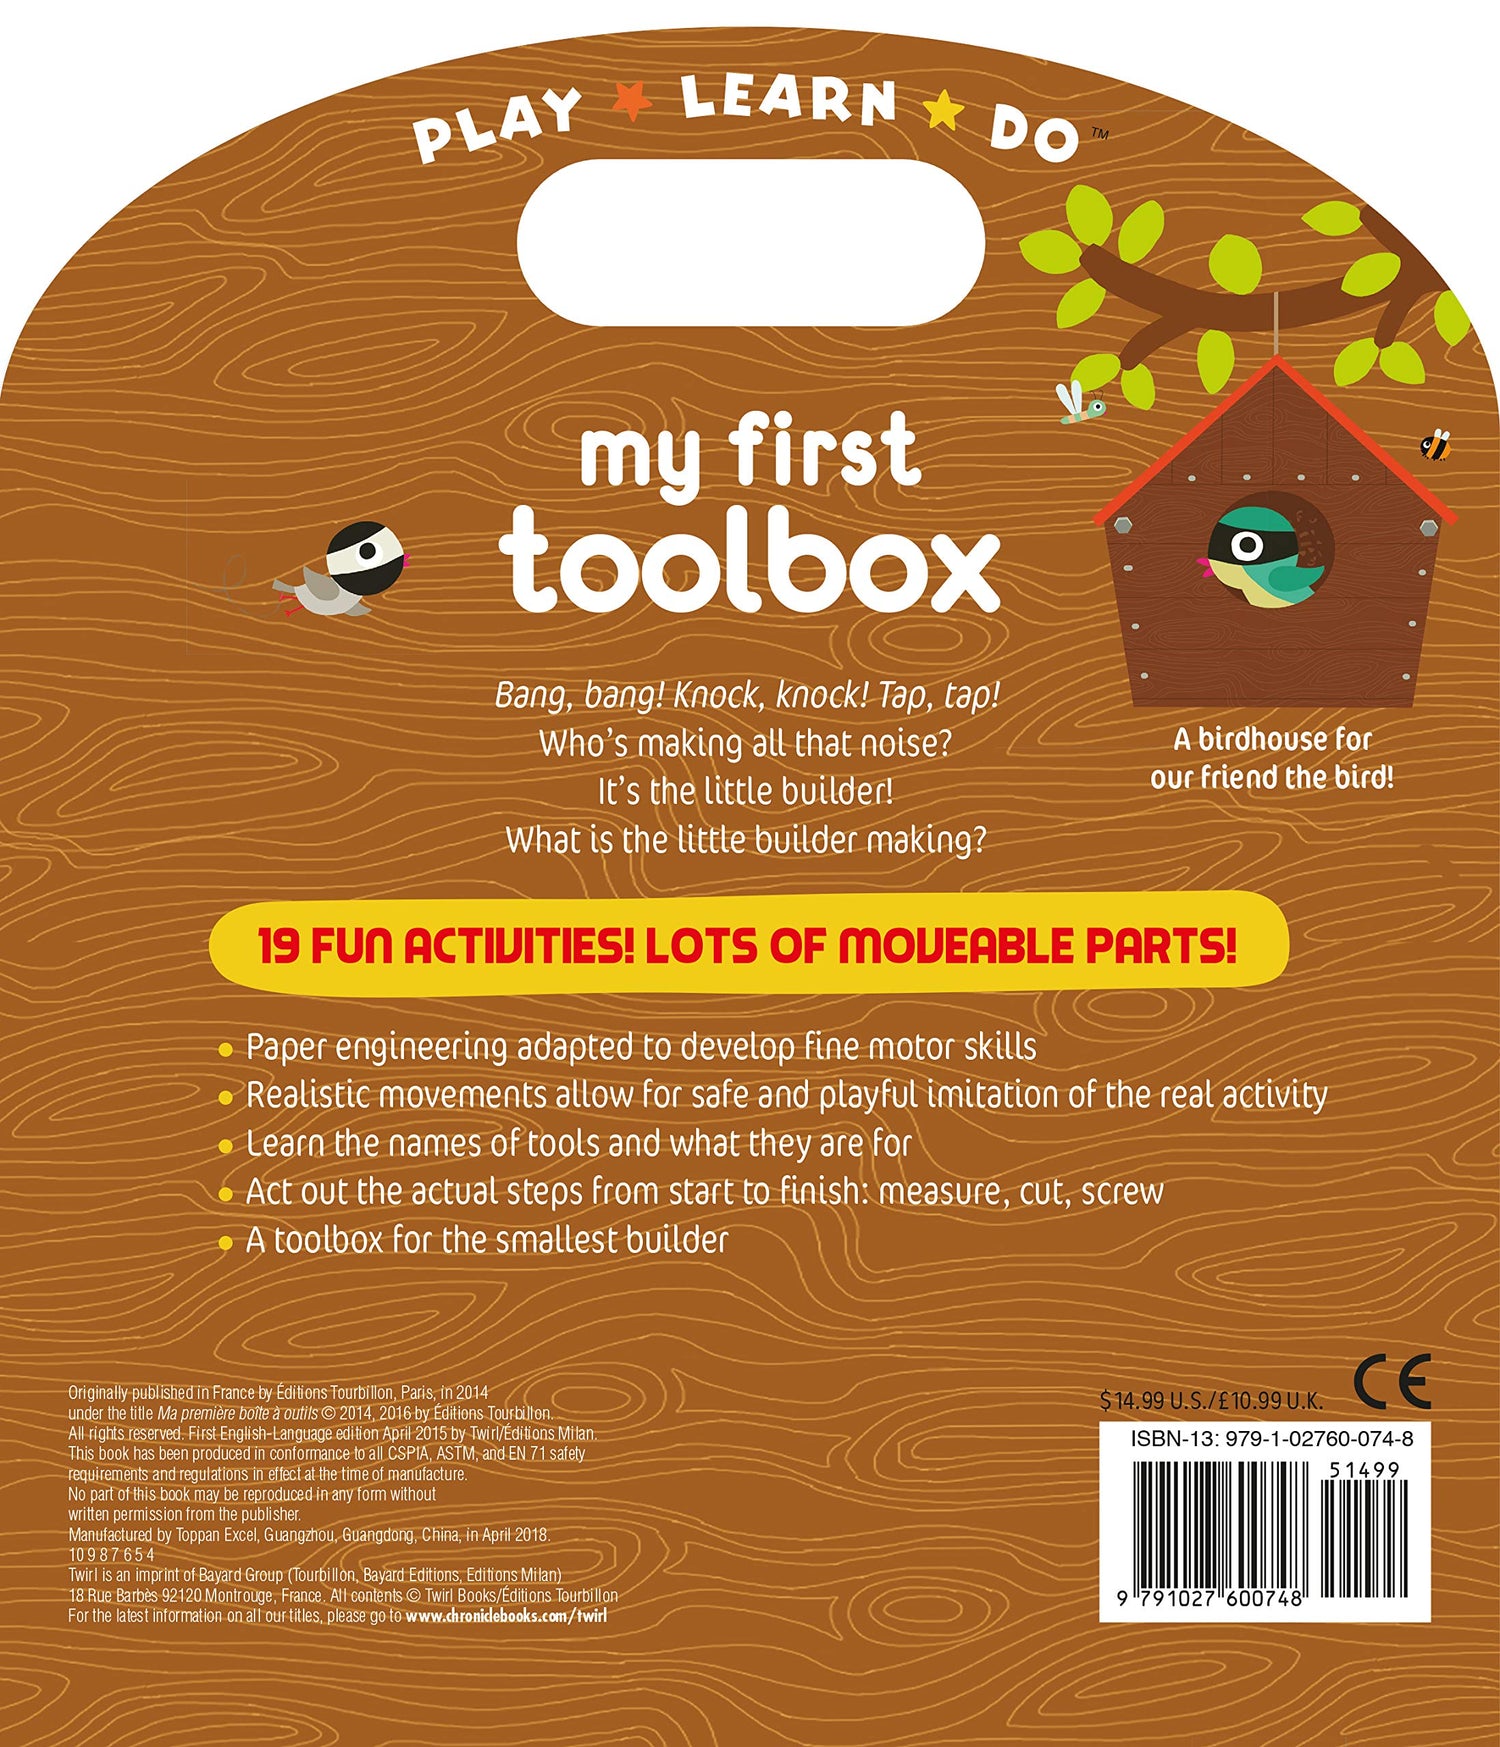 My First Toolbox: A lift-the-flap activity book